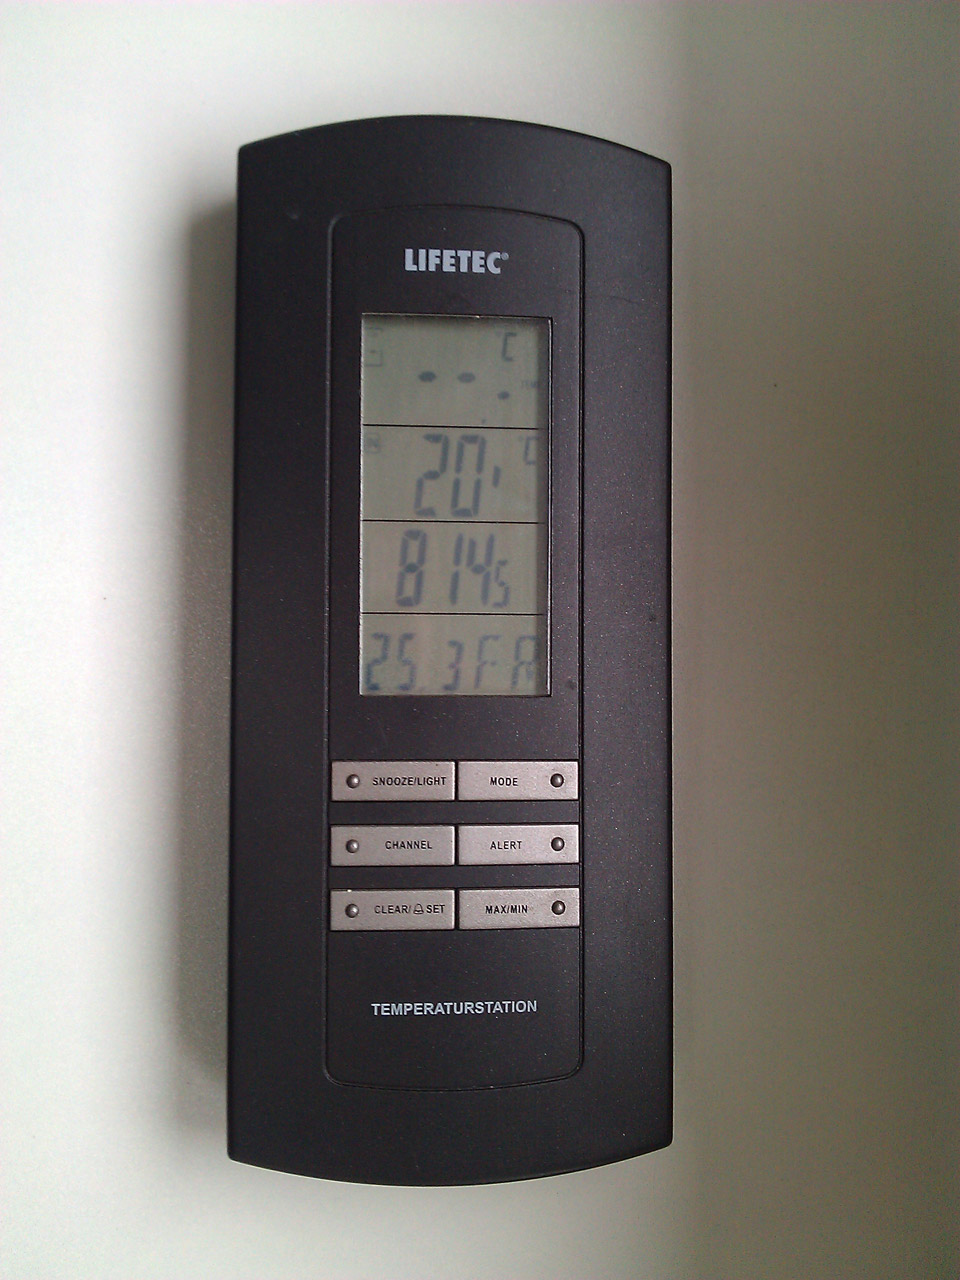 The weather station displays current weather data such as the indoor and outdoor temperature. In addition, the date of the current day is displayed.